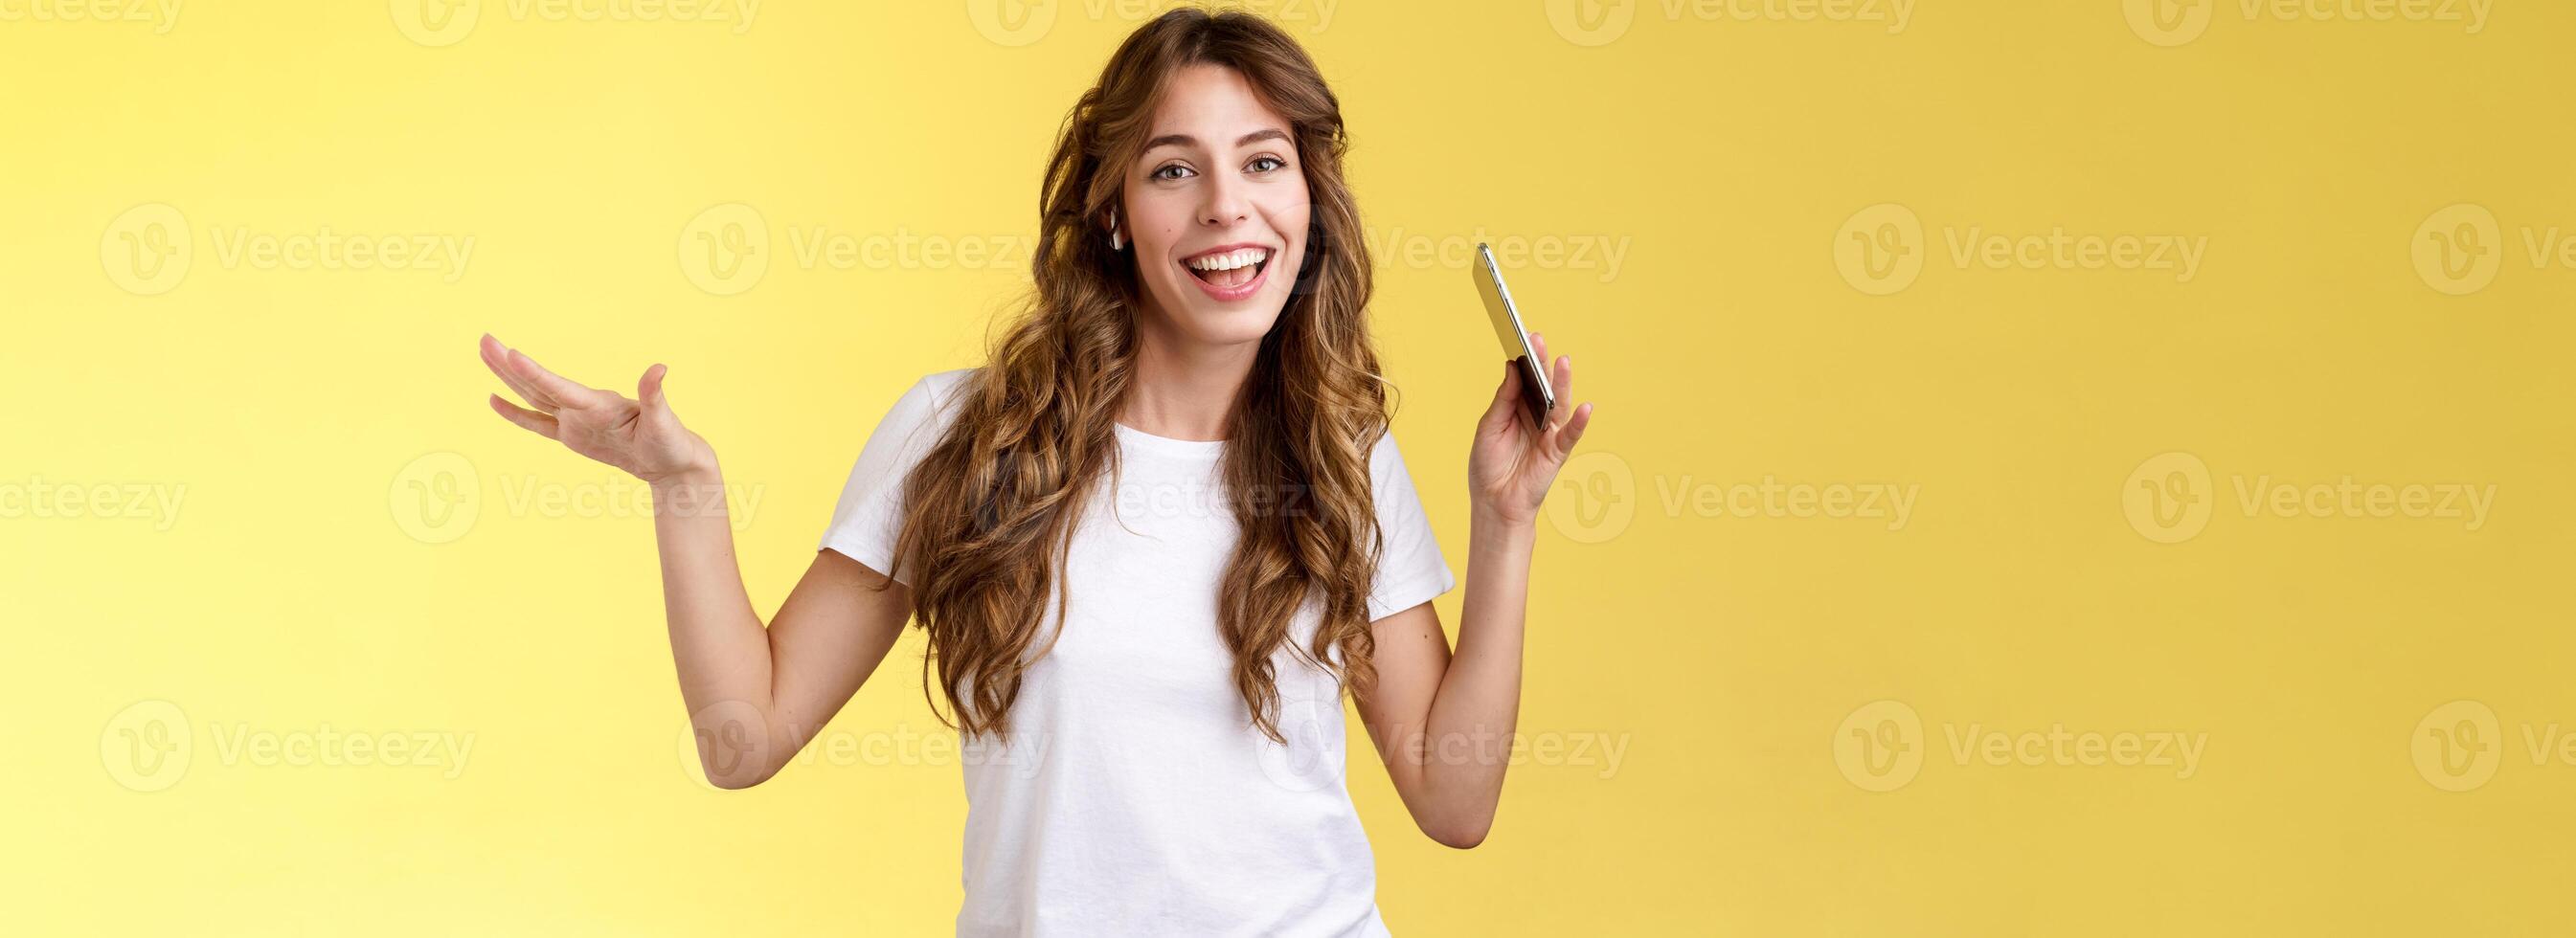 Sassy cheerful carefree attractive modern girl curly hairstyle having fun lively upbeat mood moving body rhythm shake hands hold smartphone lip sync wear wireless earbuds listen music dancing photo